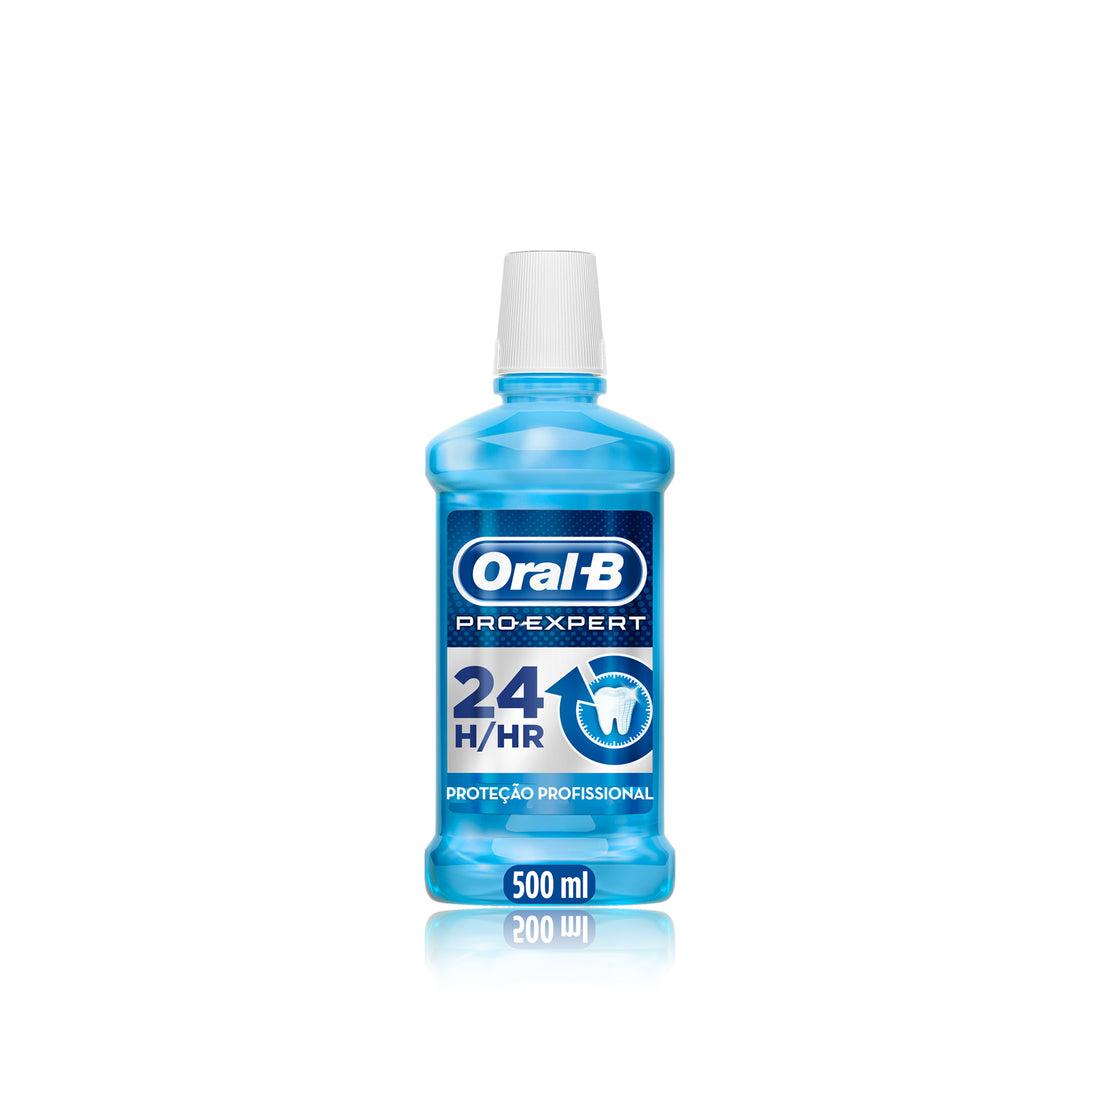 Oral-B Pro-Expert Elixir Professional Protection 500 Ml